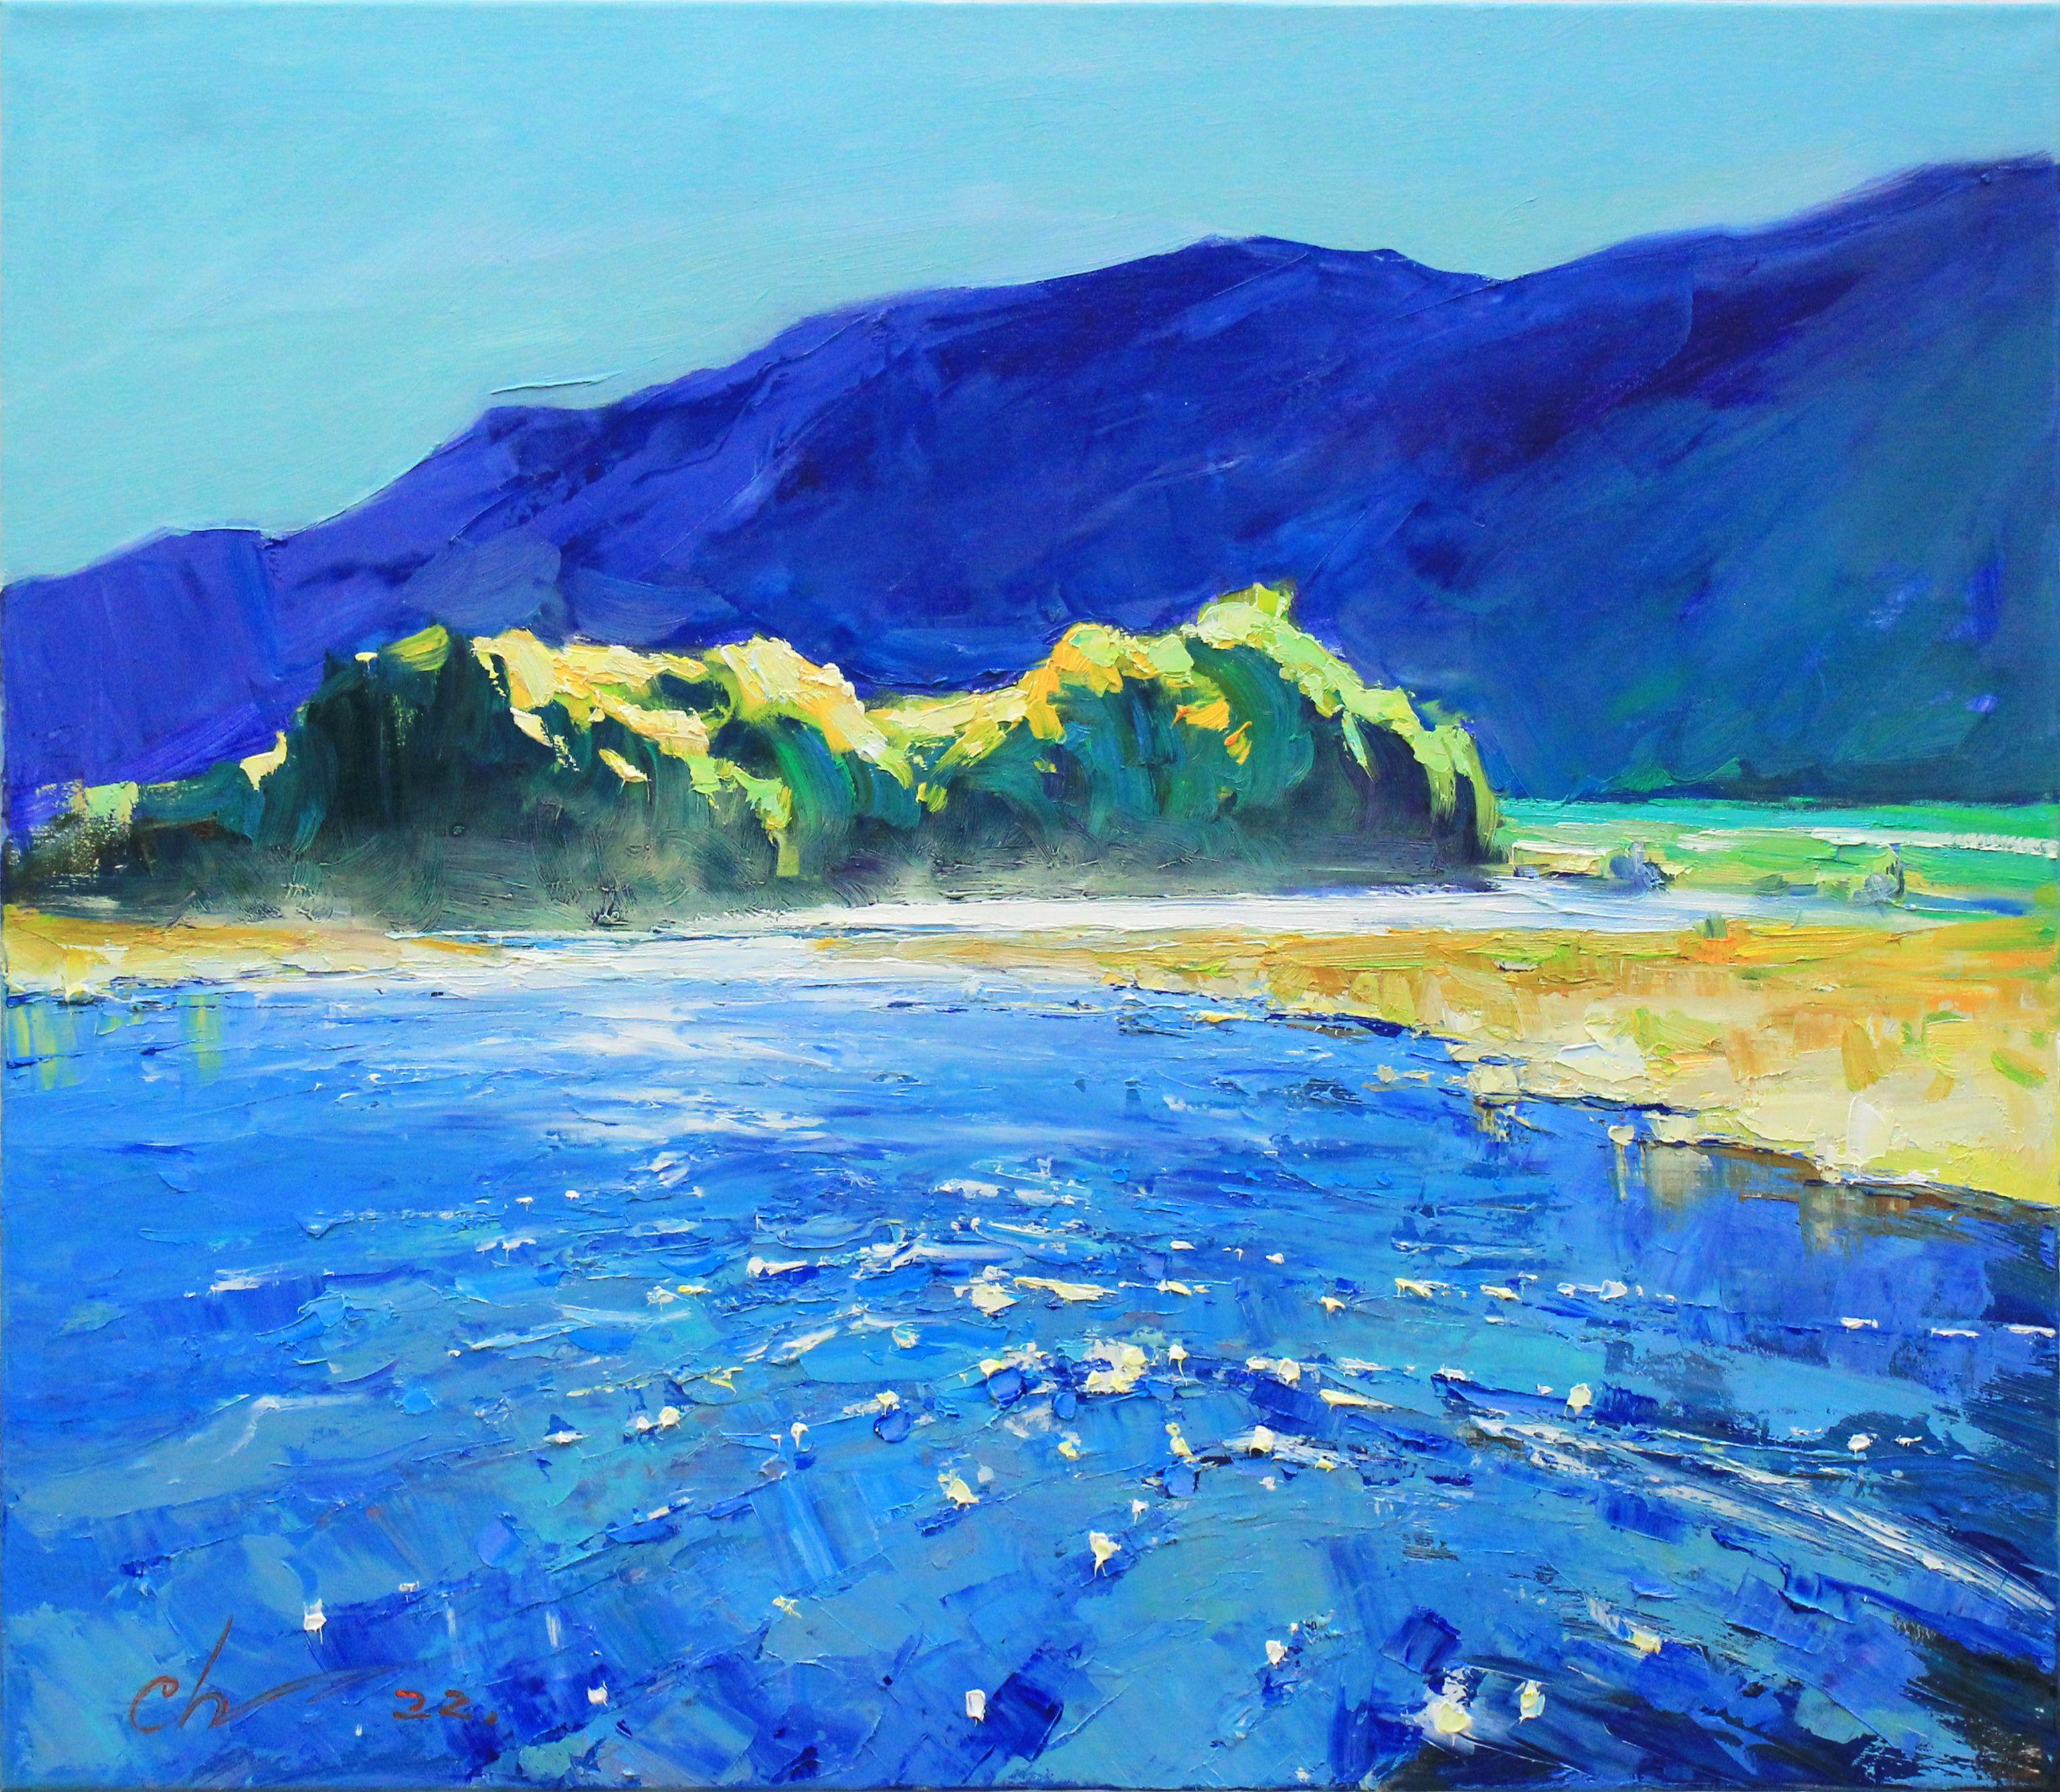 Morning coast, river, summer trees, mountains, river rocks, painted on the painting "Midday". A rich palette of blue, green, yellow hues enhances the energy and beauty of the river.  The painting is written in the style of impressionism art,